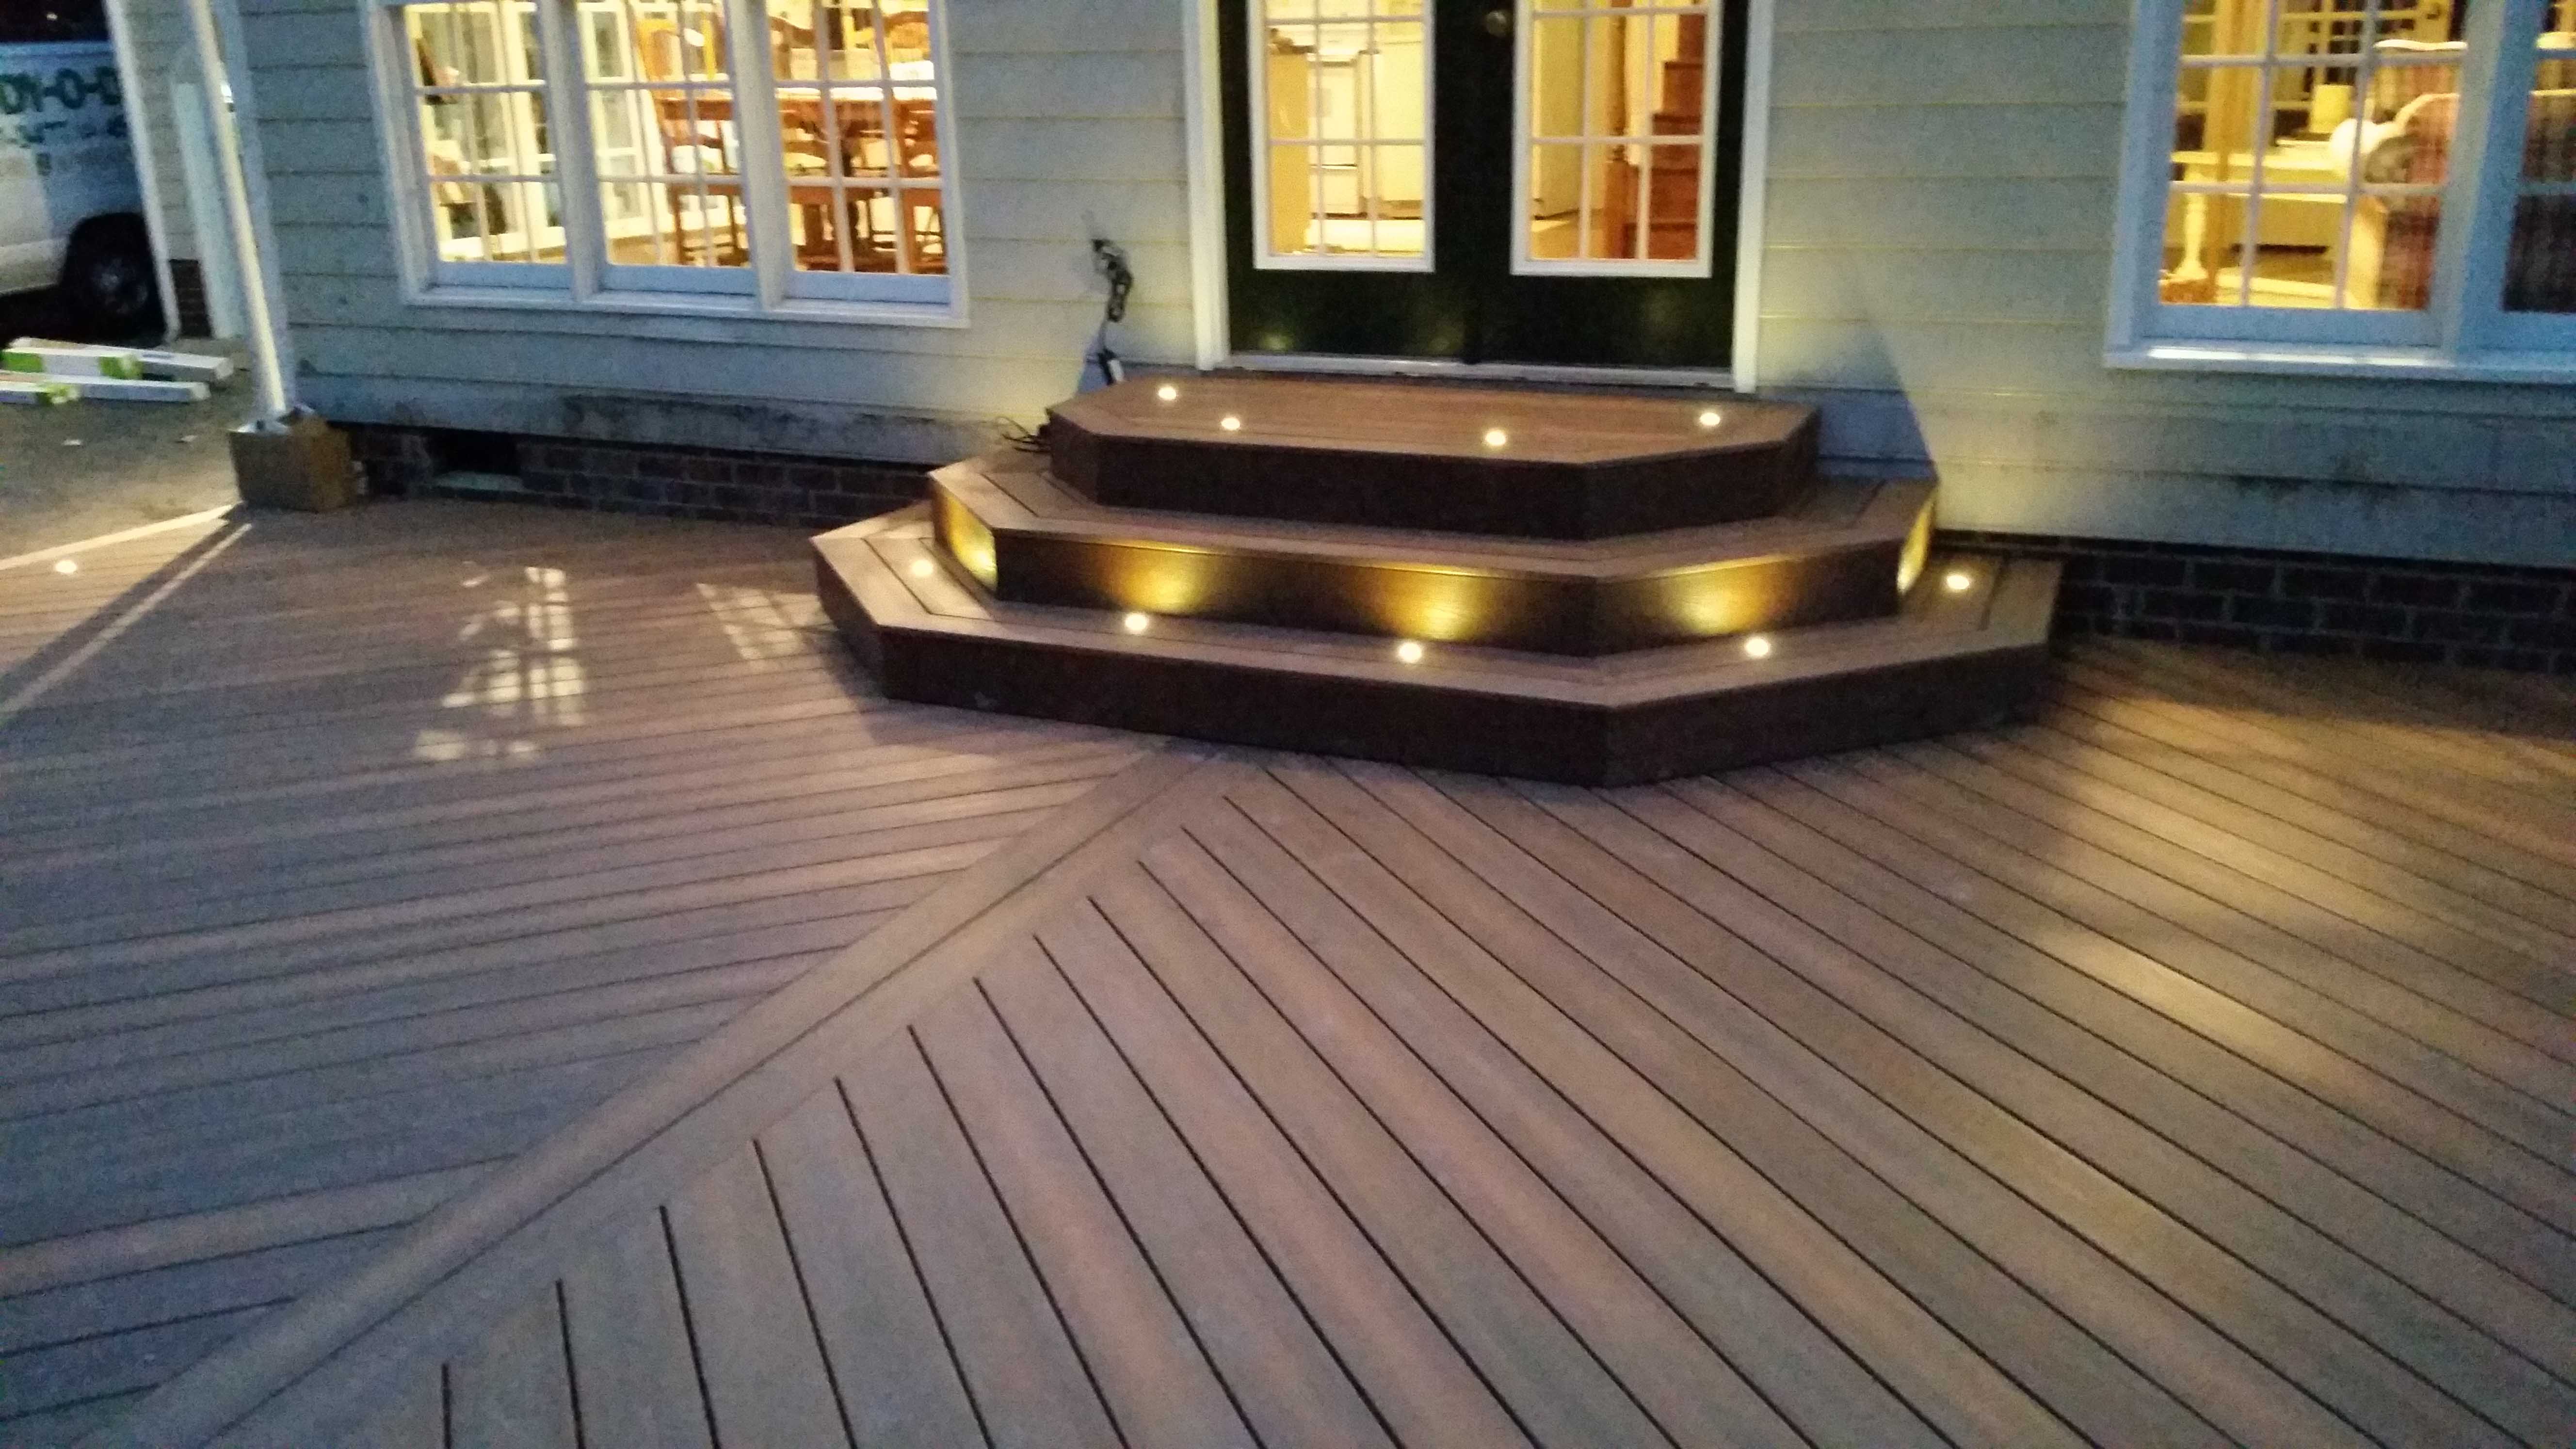 Decks are meant to be enjoyed, not maintained.